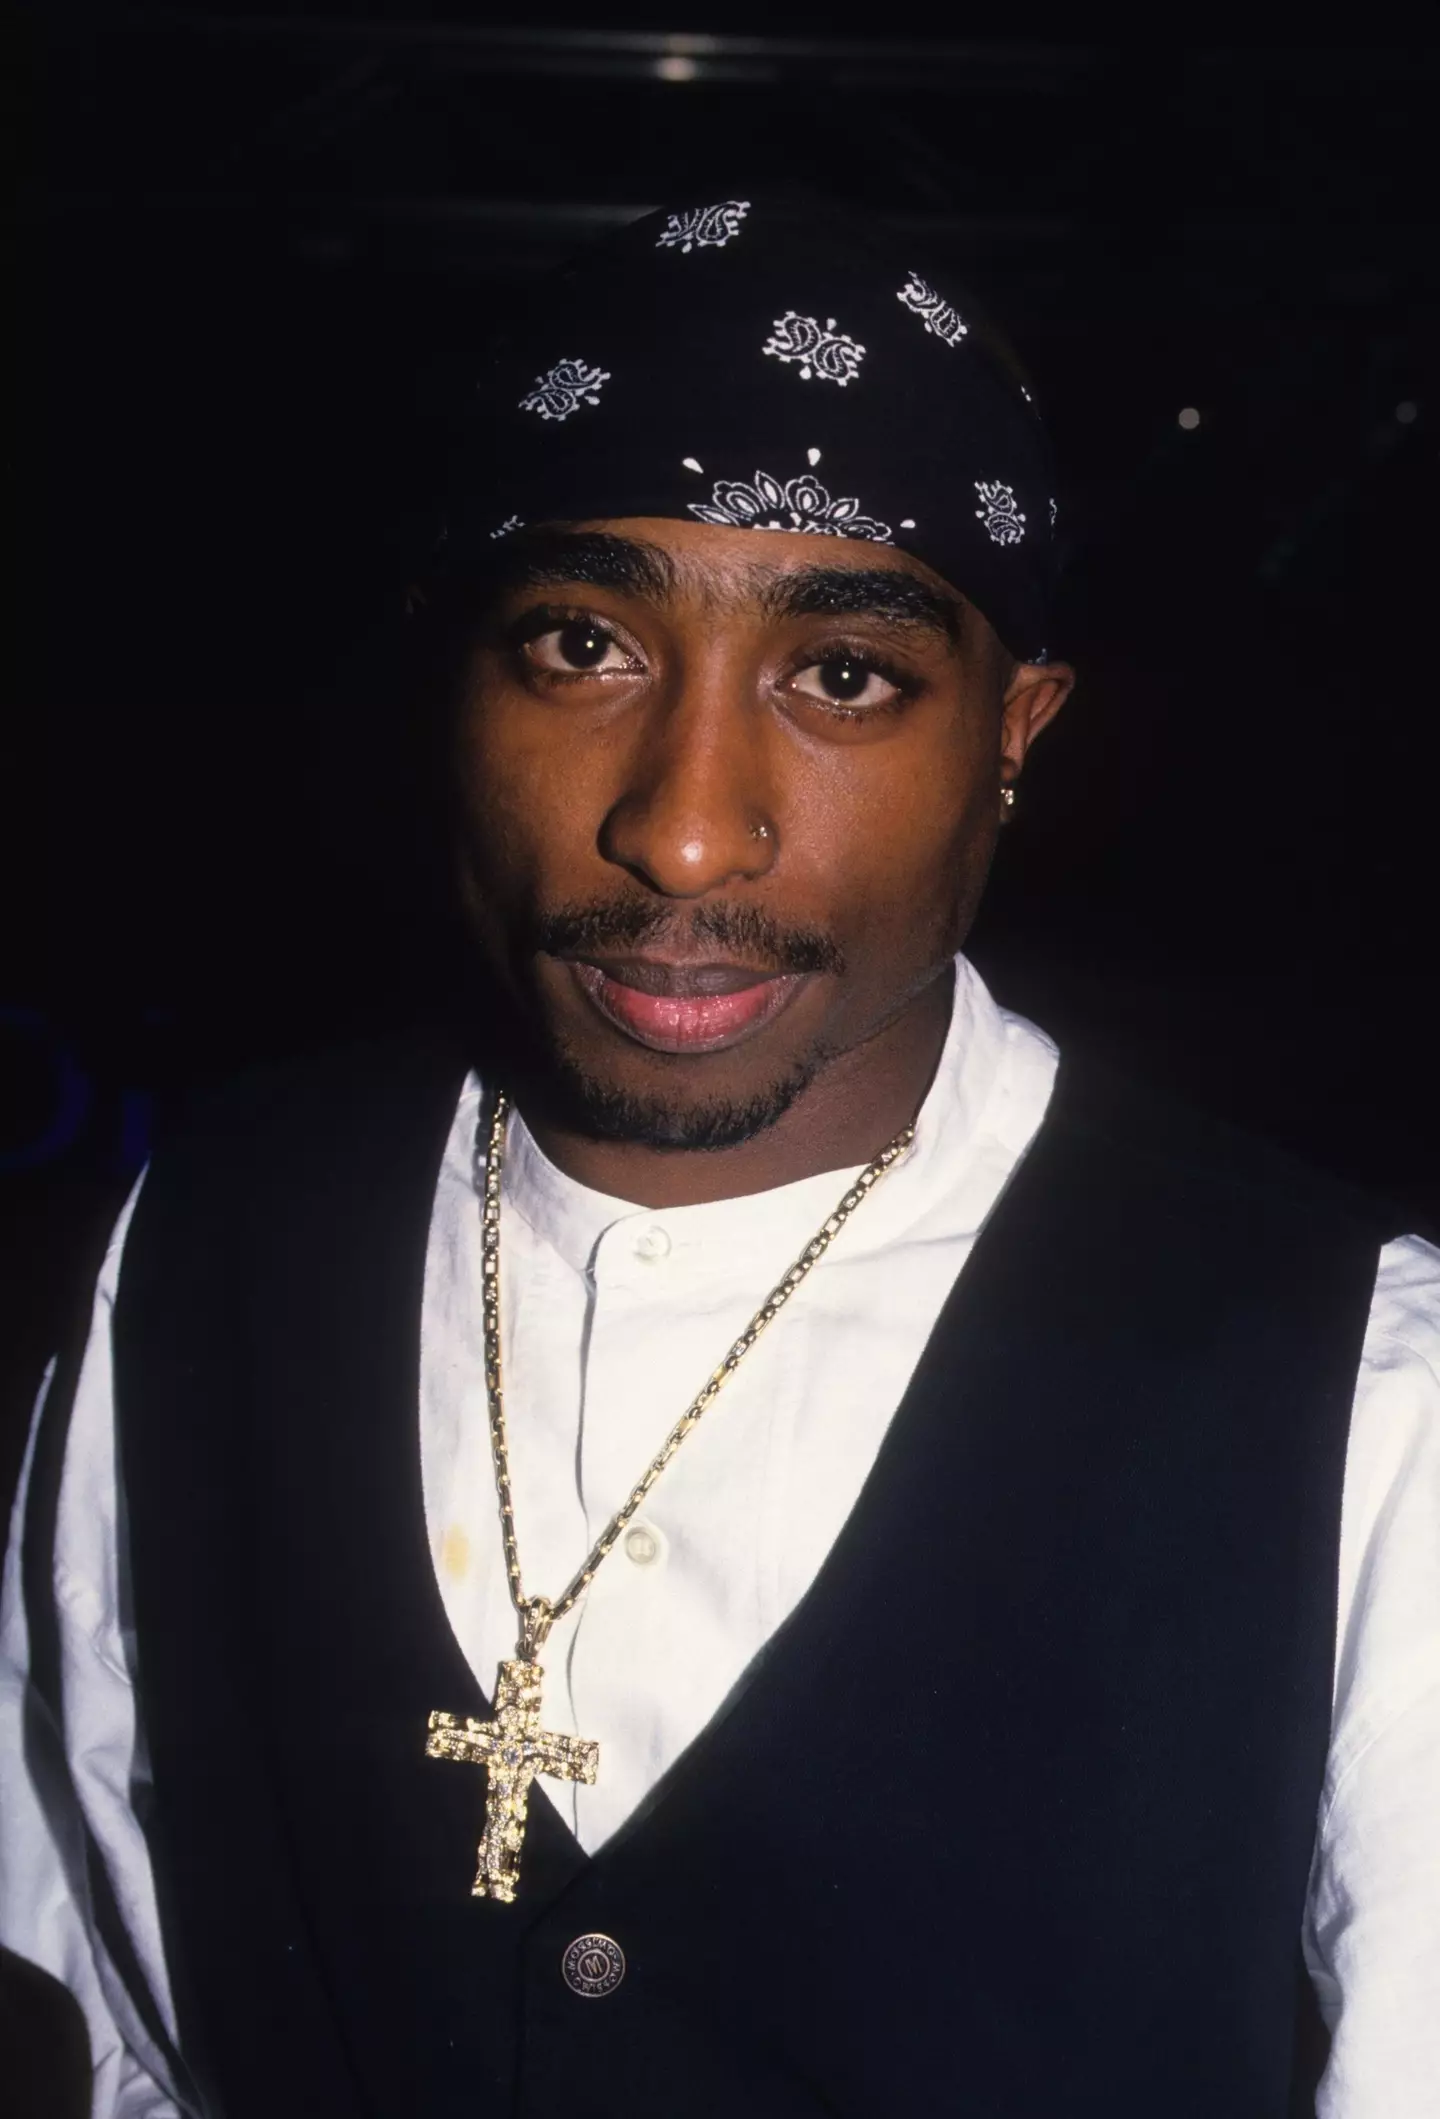 After being shot in Las Vegas, Tupac died a few days later.